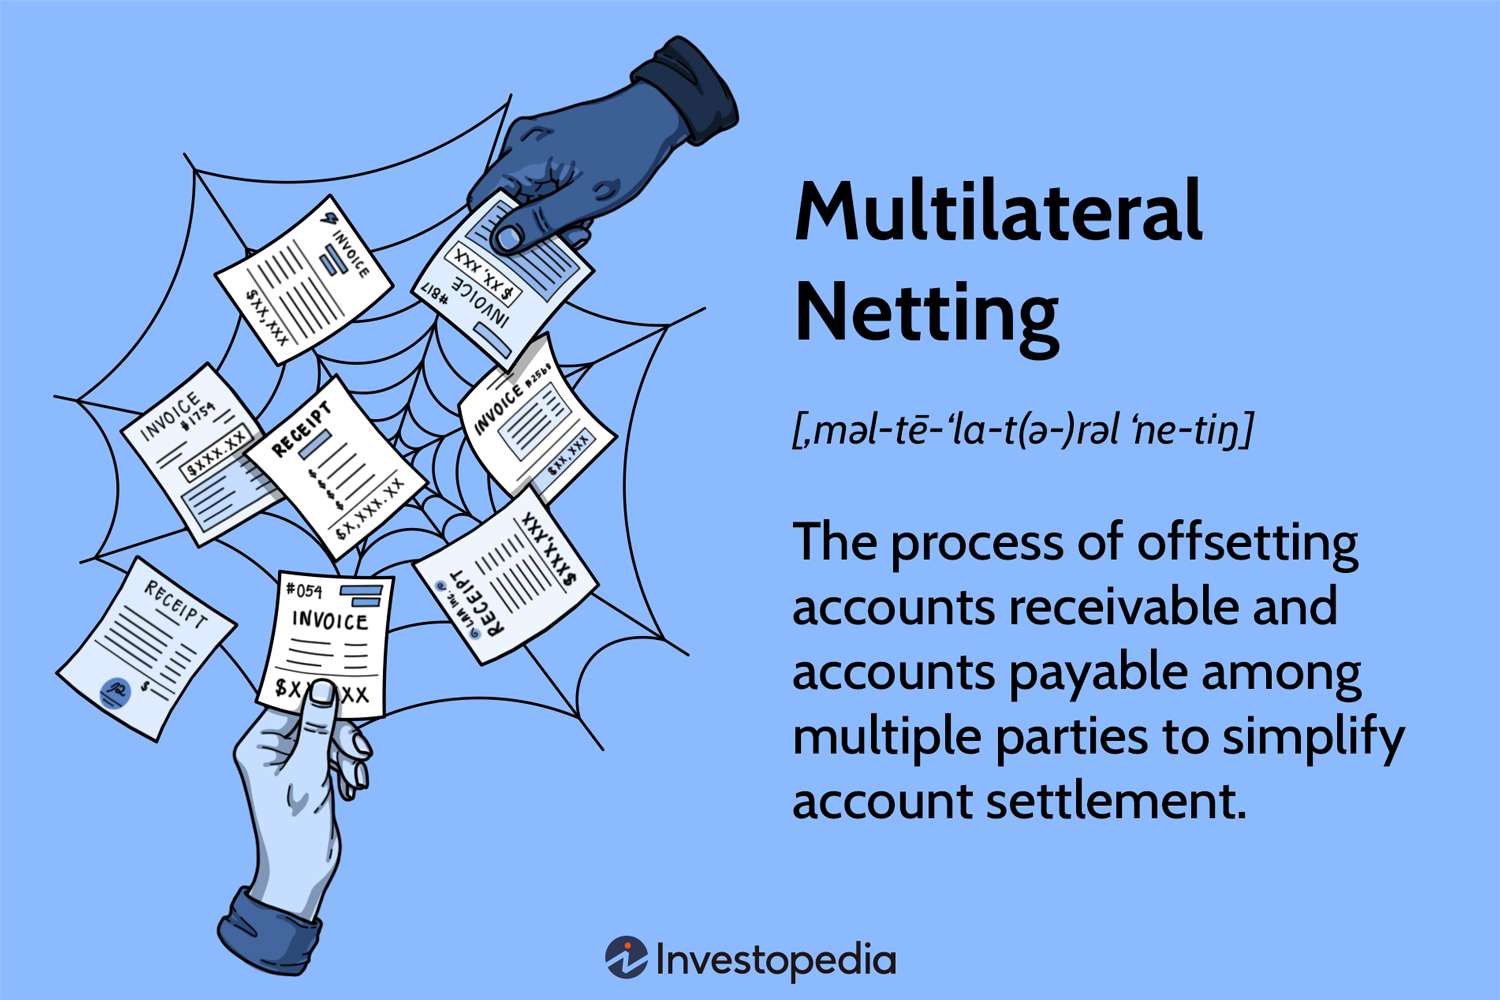 Multilateral Netting